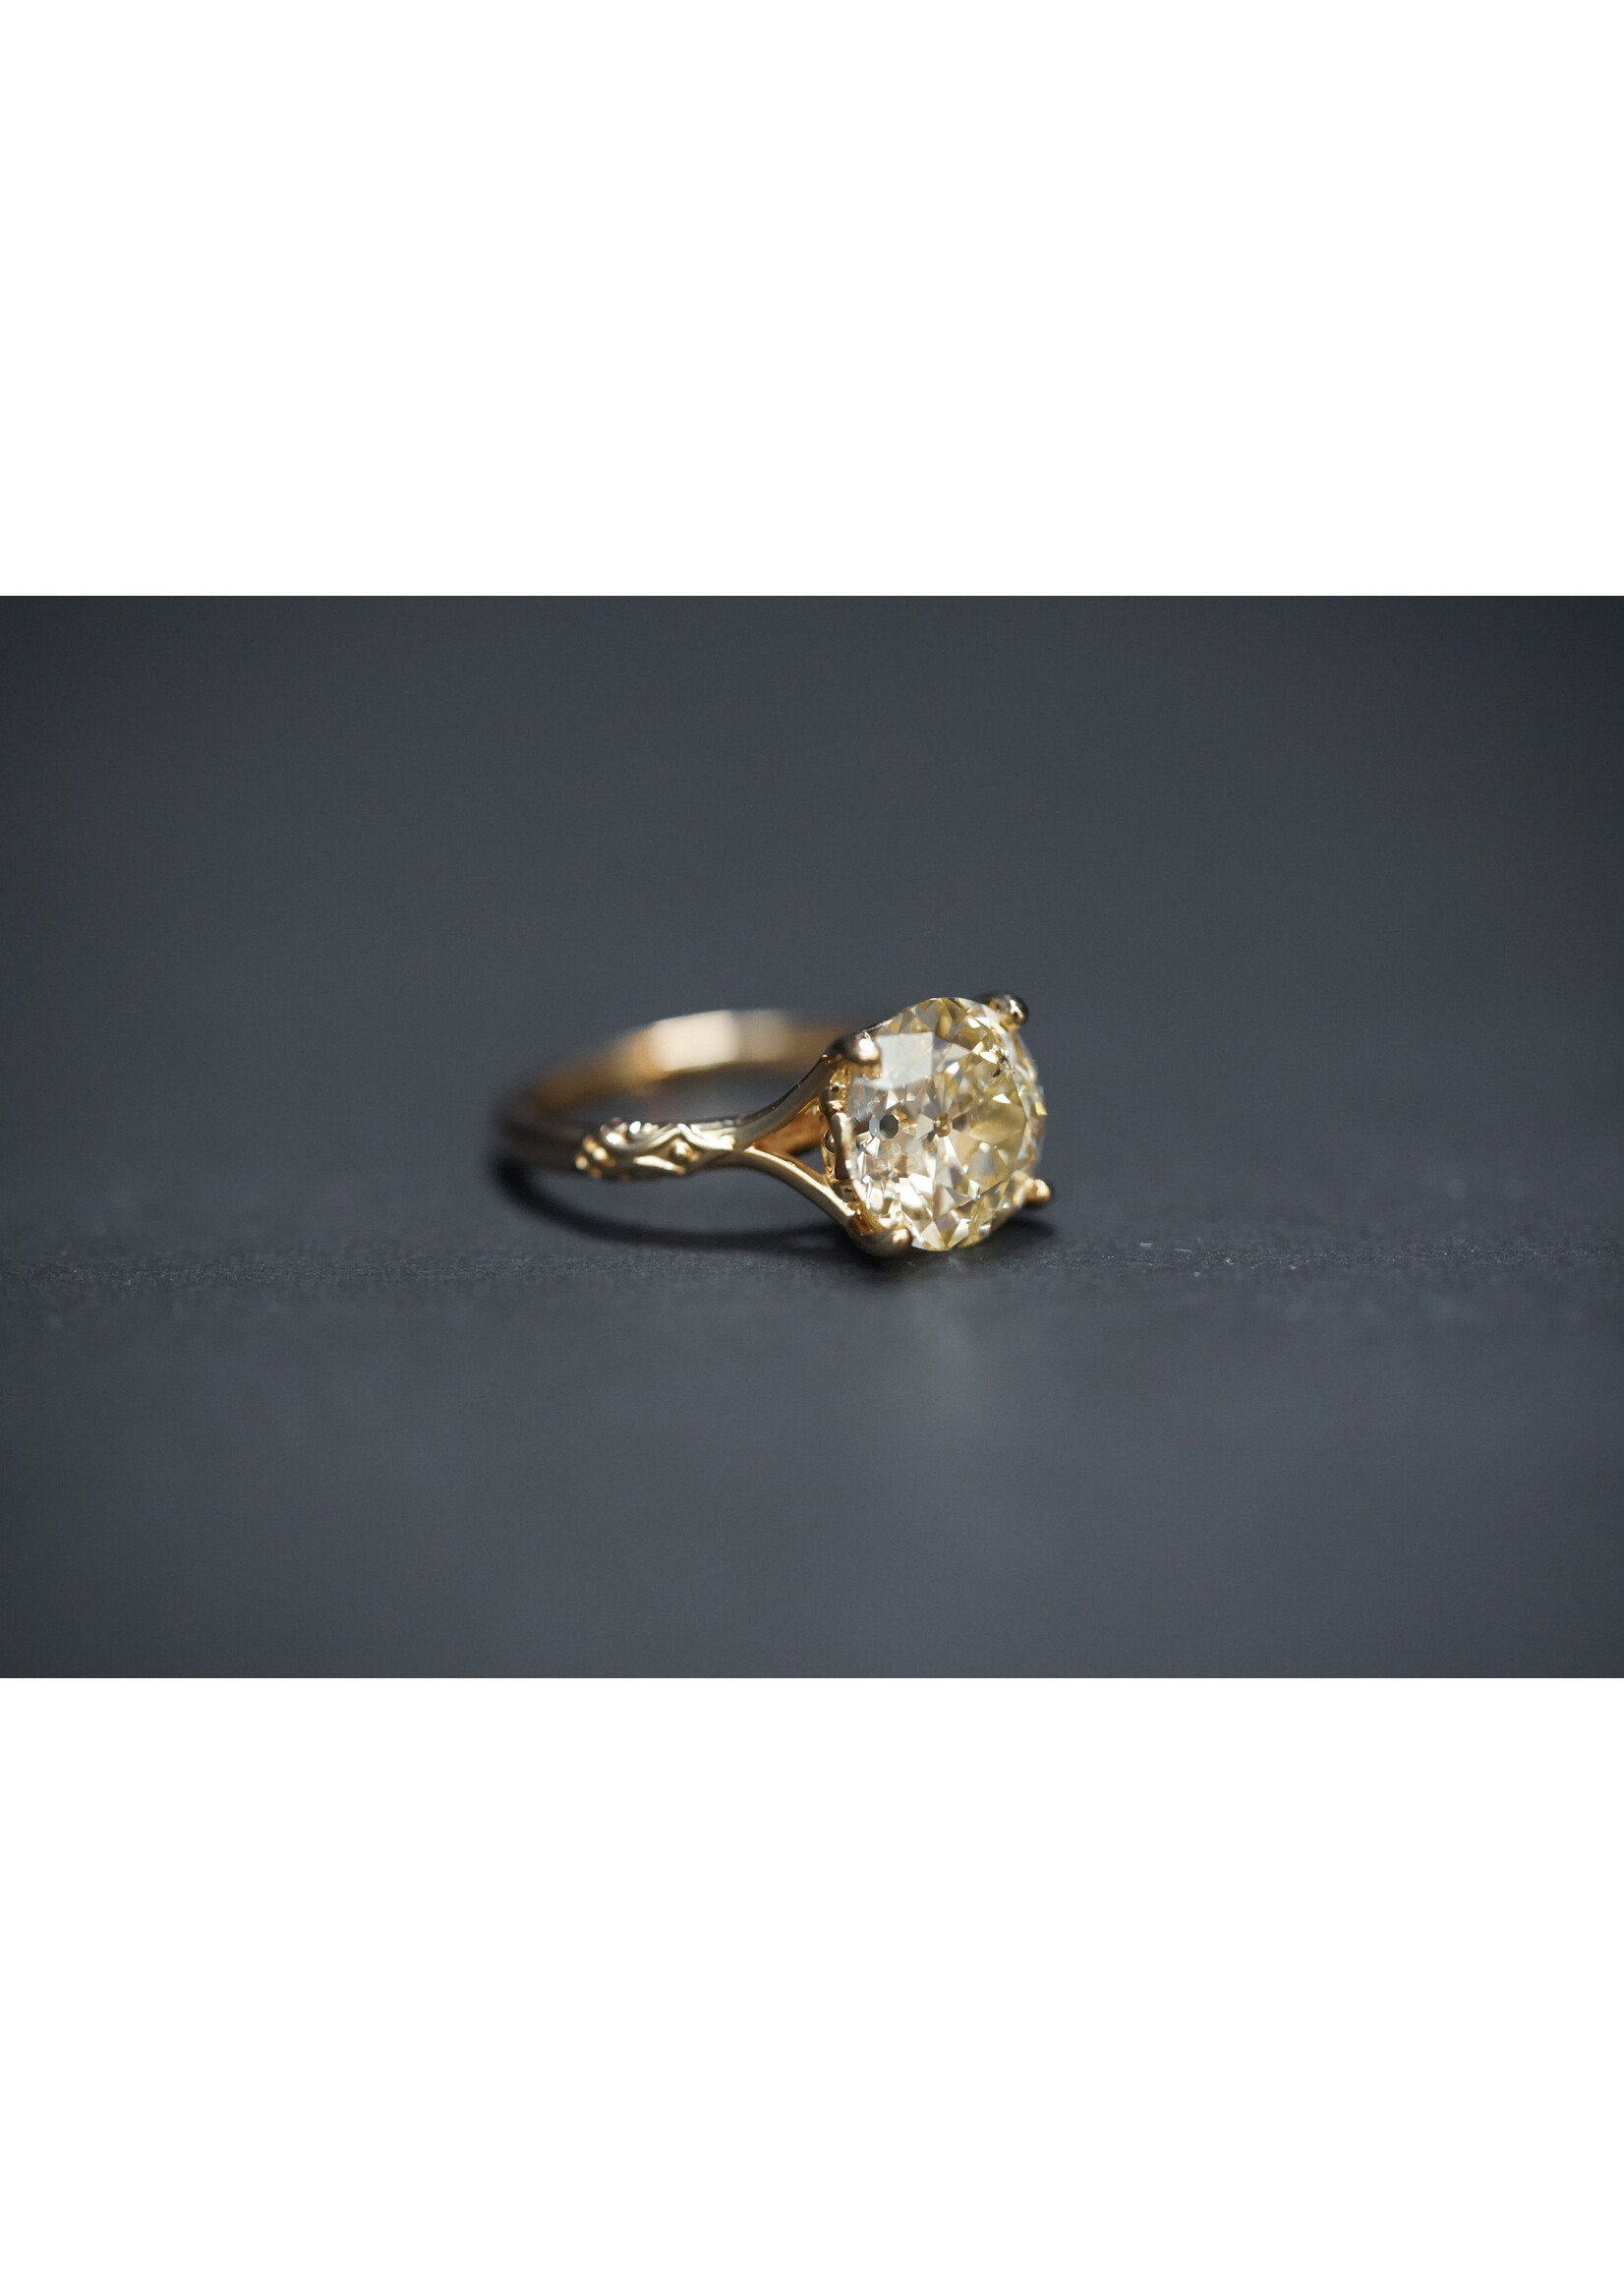 14KY 5.35g 4.48ct N/SI2 Old Mine Cut Diamond Solitaire Engagement Ring (size 7)